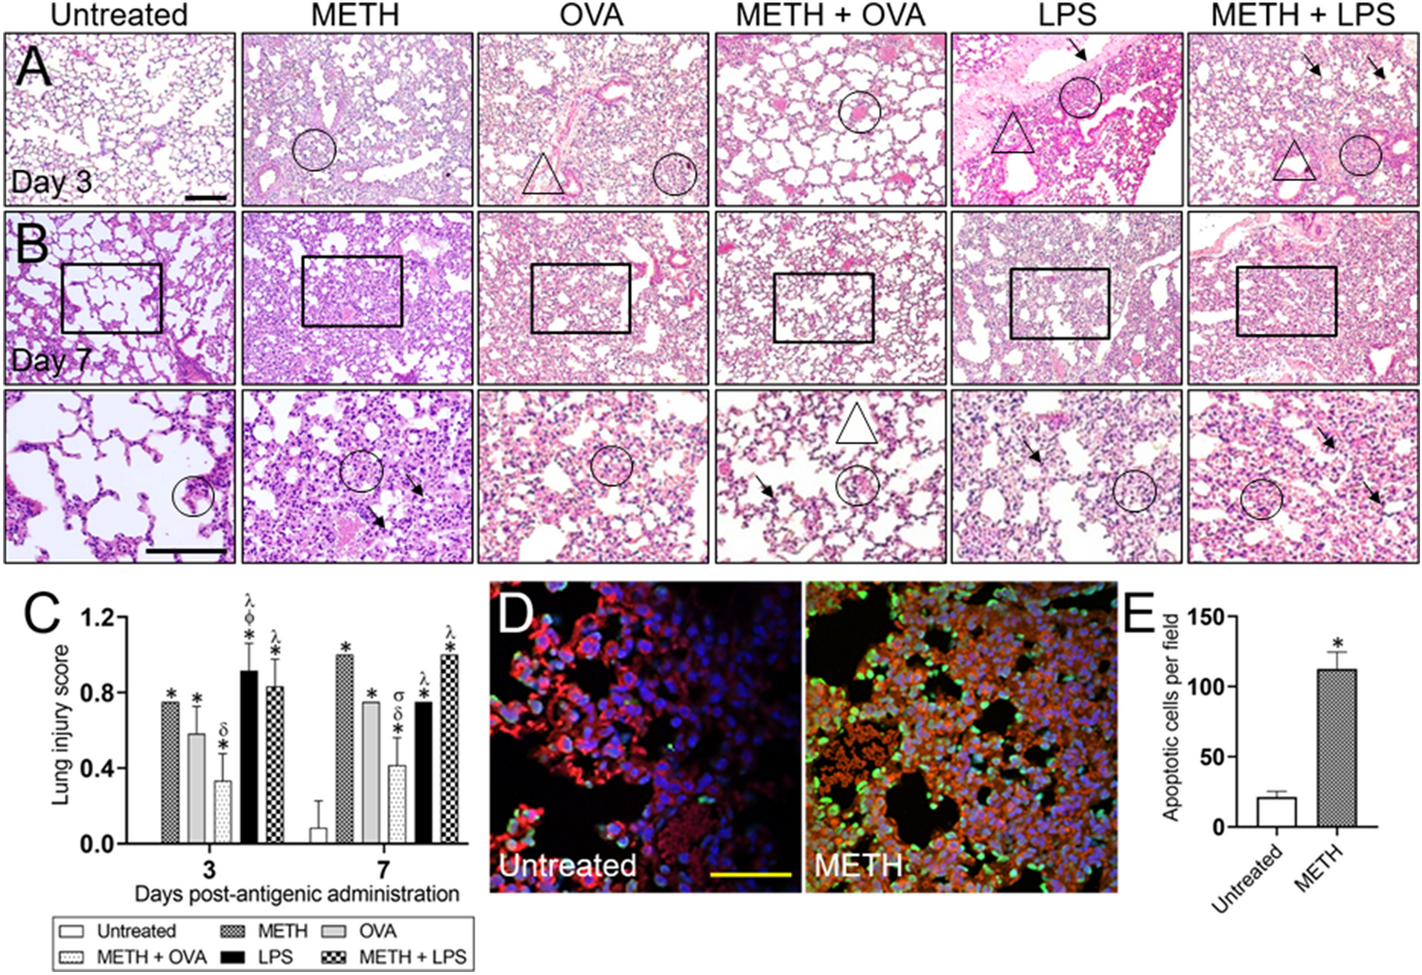 Methamphetamine facilitates pulmonary and splenic tissue injury and reduces T cell infiltration in C57BL/6 mice after antigenic challenge Scientific Reports